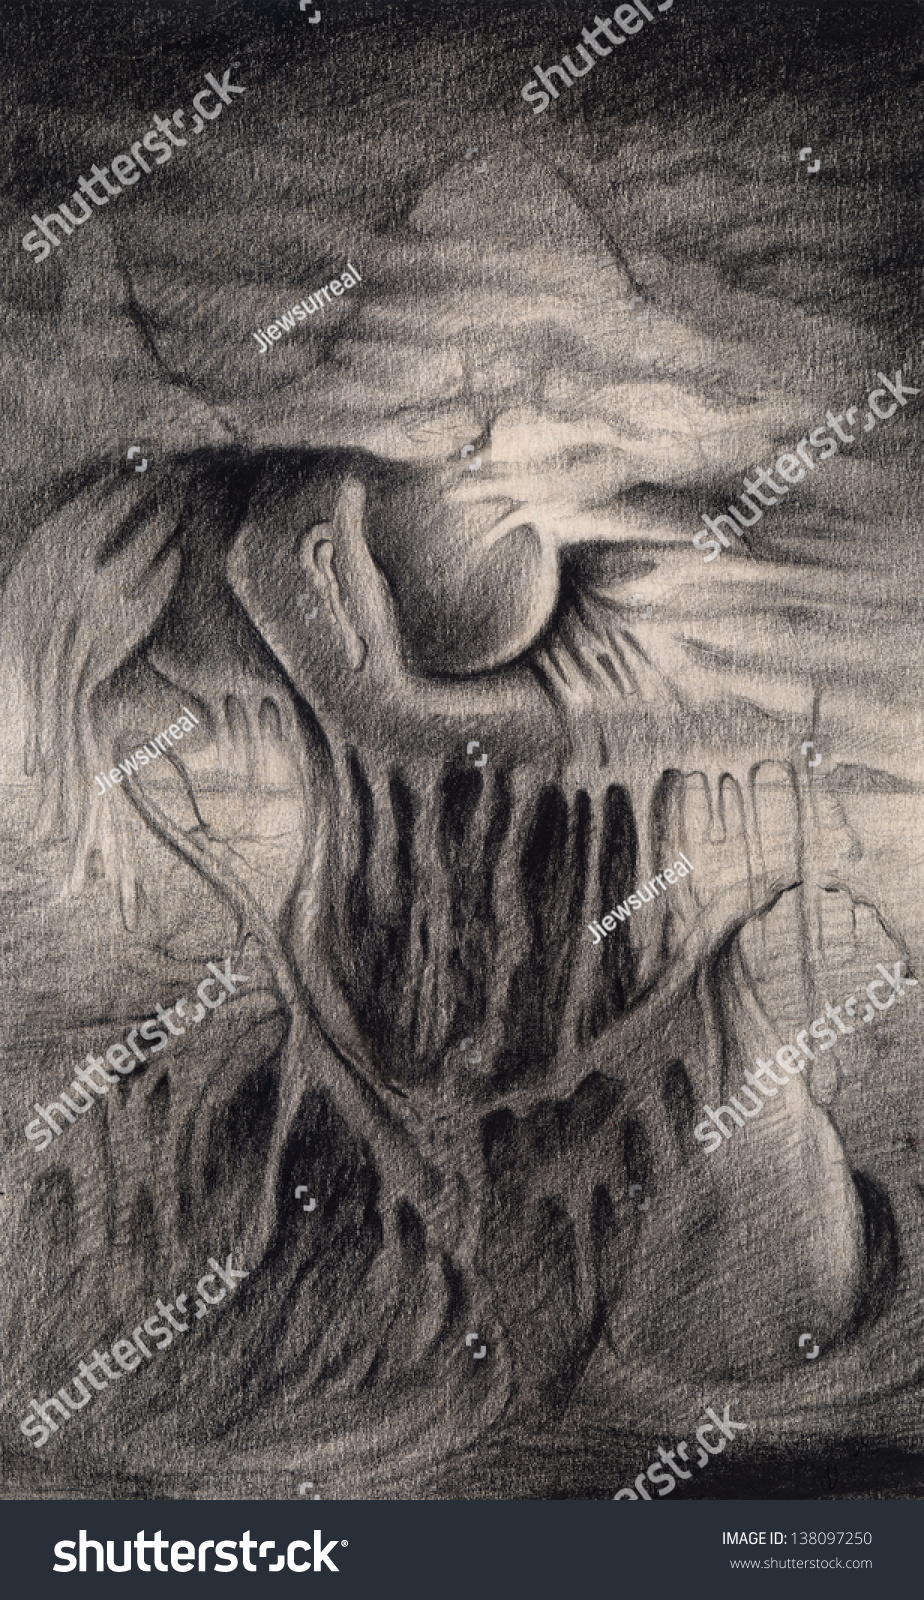 Surreal Women .Pencil Drawing On Paper. Stock Photo 138097250 ...